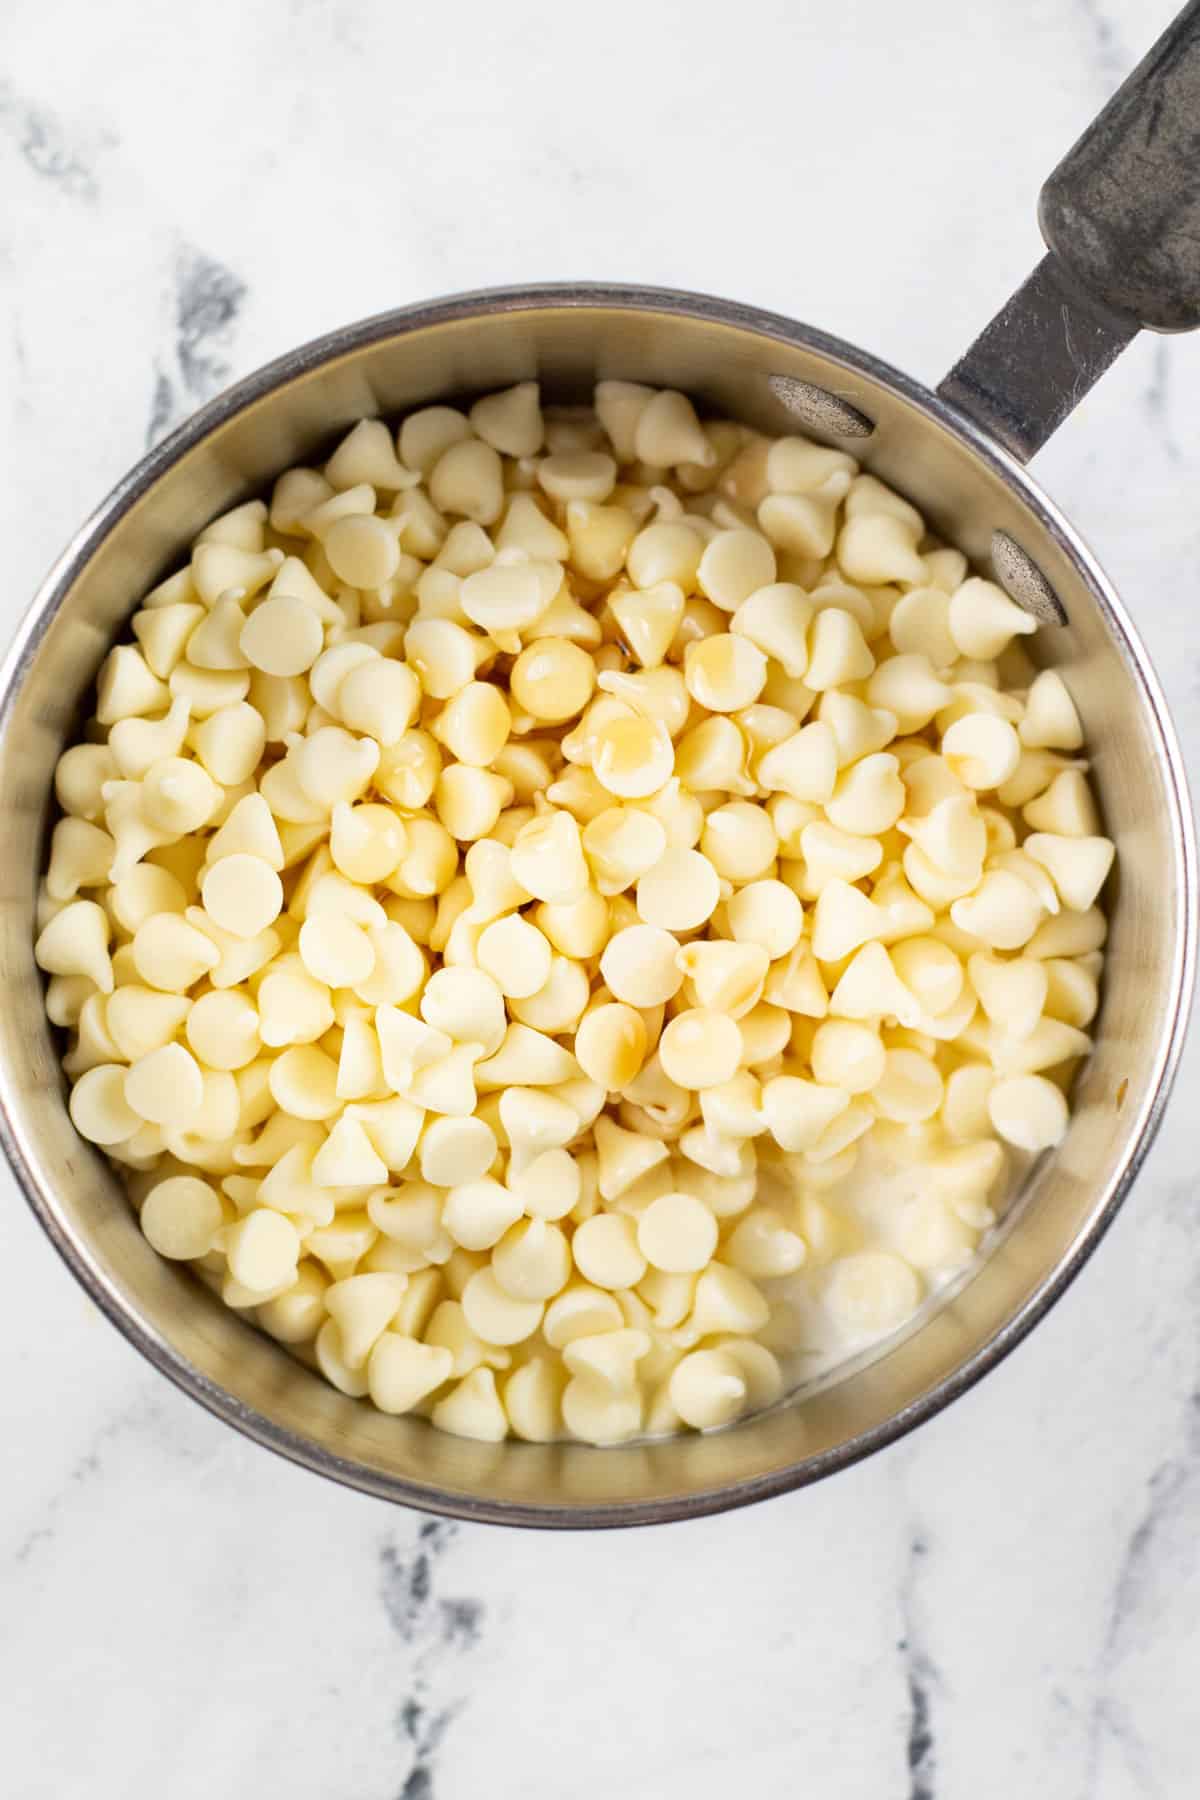 White chocolate chips for Layered Candy Corn Fudge